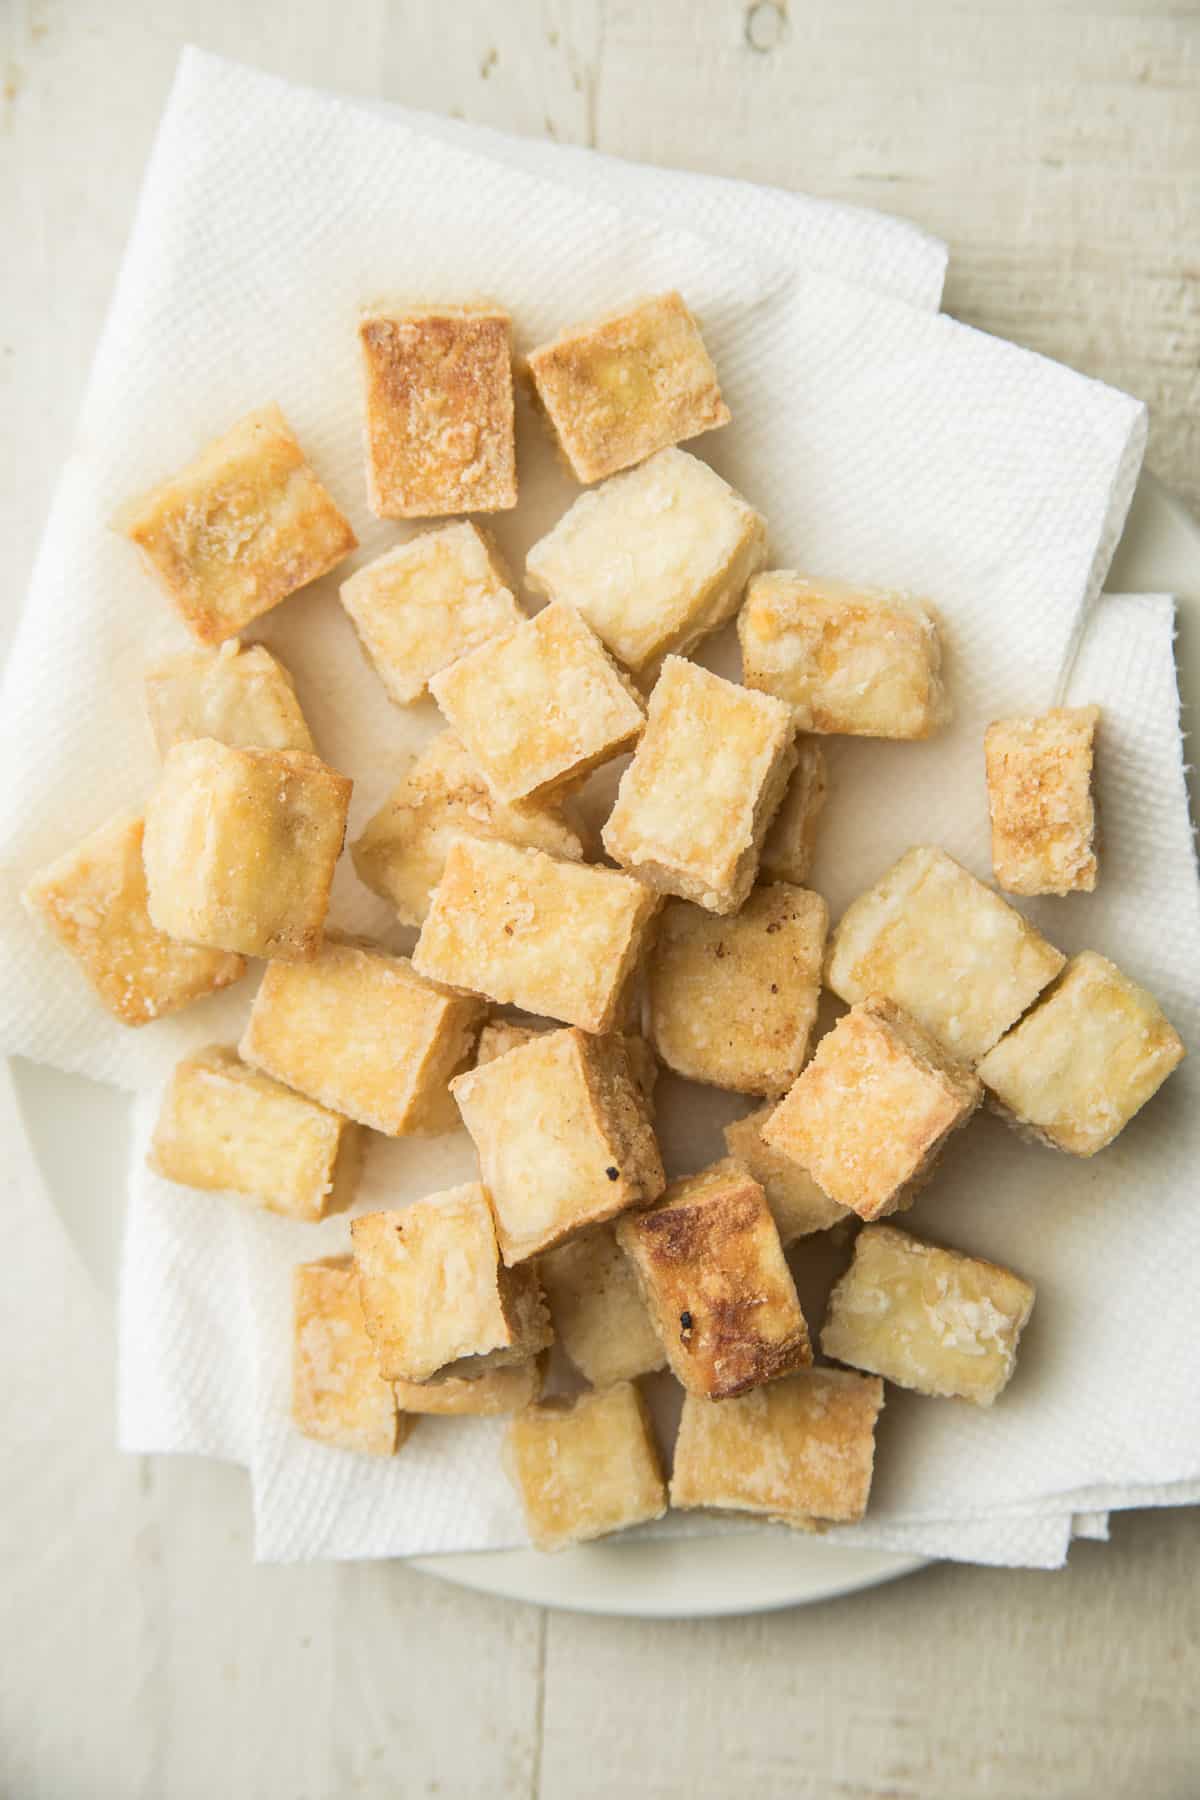 Fried Tofu on a Paper Towel-Lined Plate